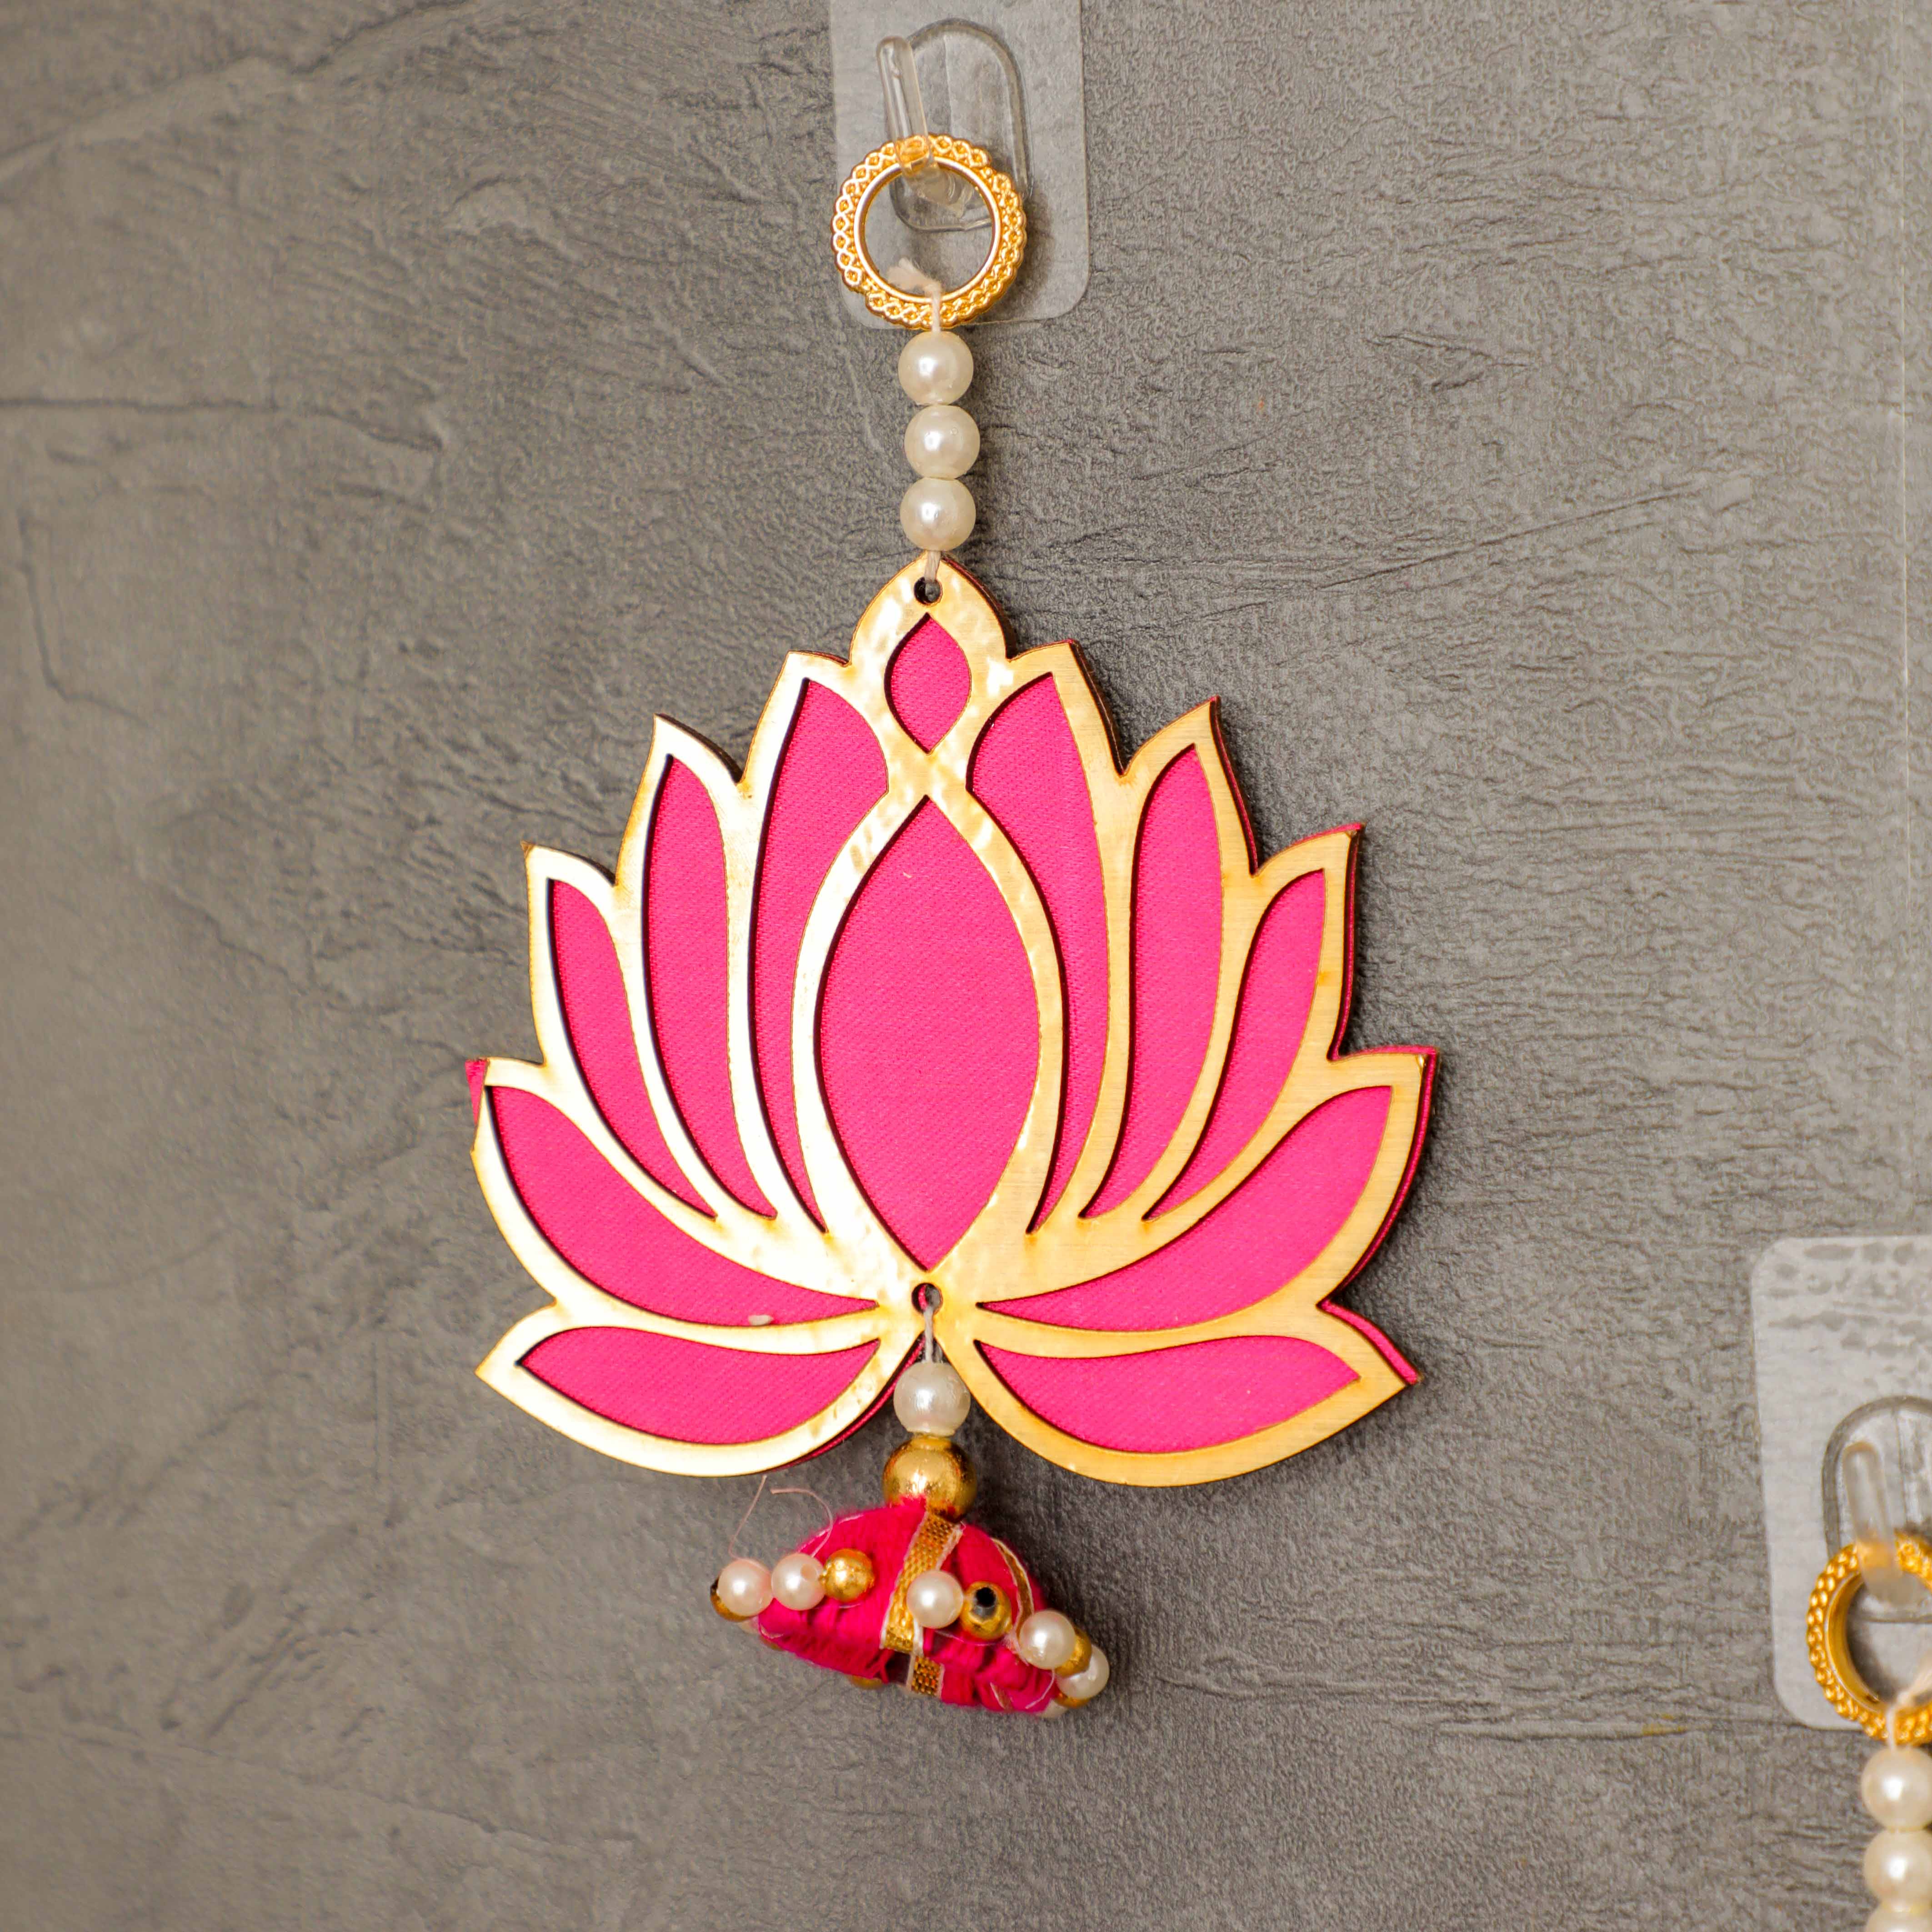 Shop Lotus Cutout for Decoration from Desifavors - Made in India